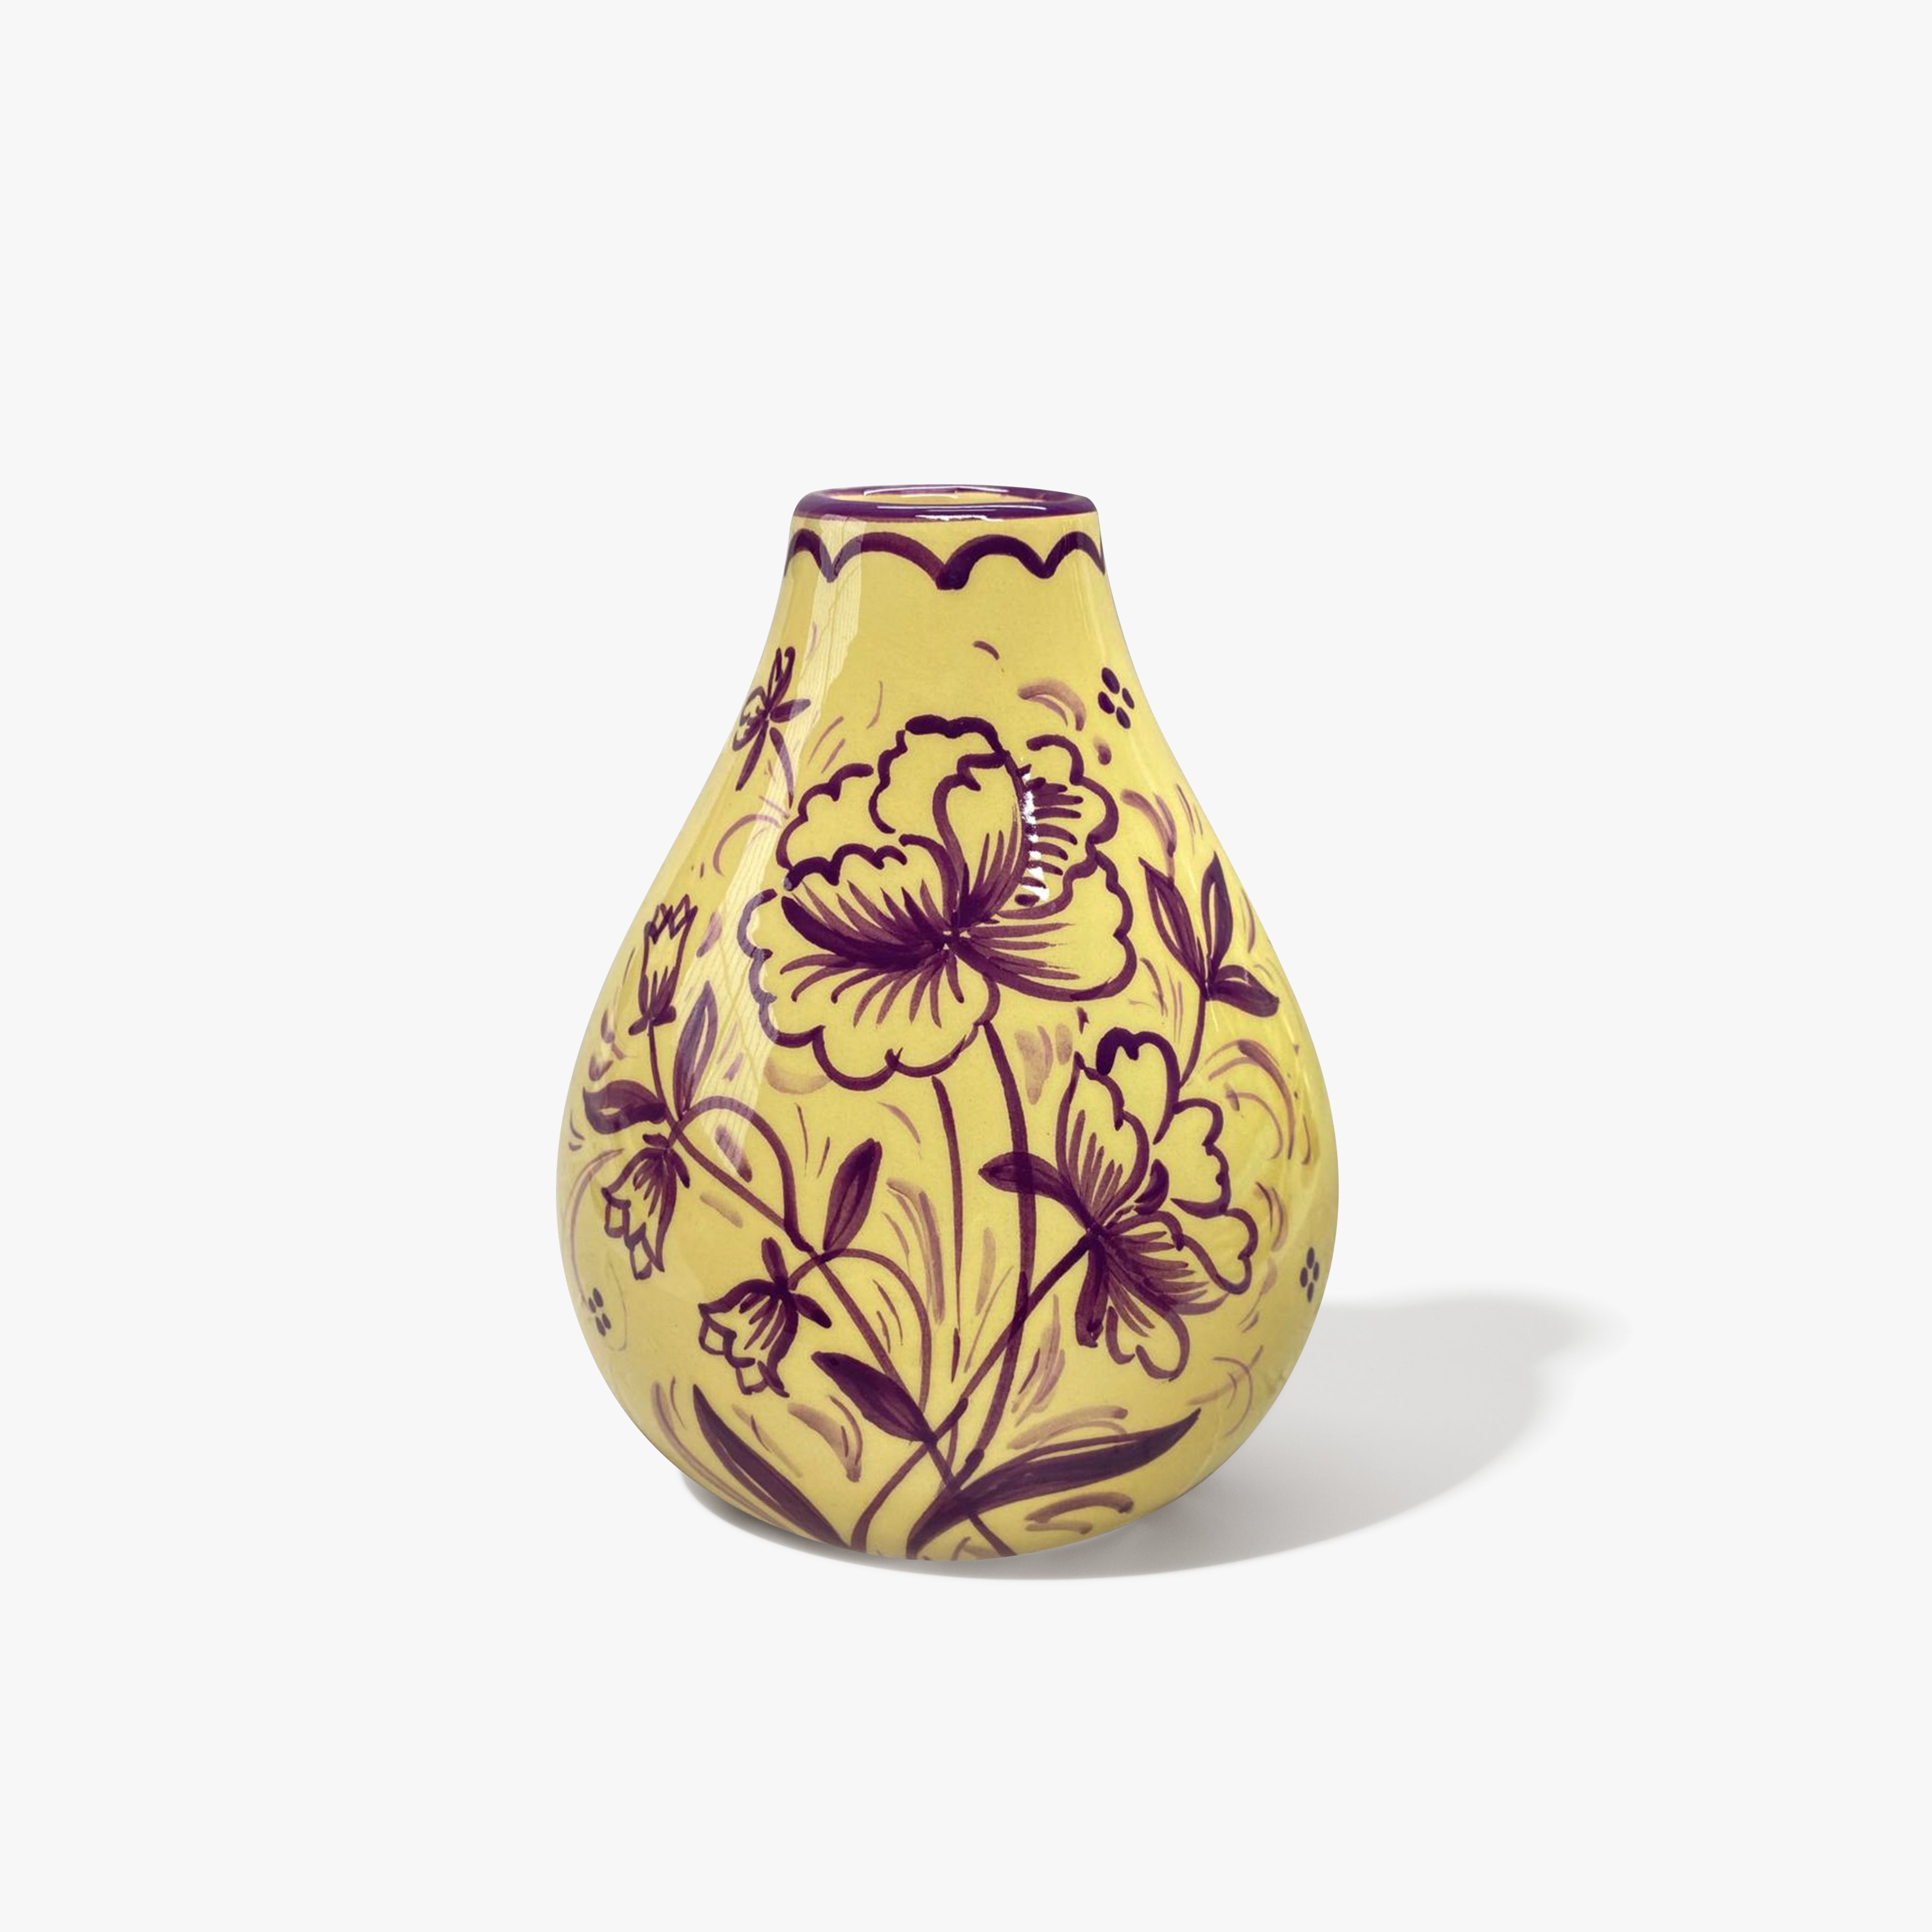 A baby yellow vase in a bulb shape with a purple floral patten. 